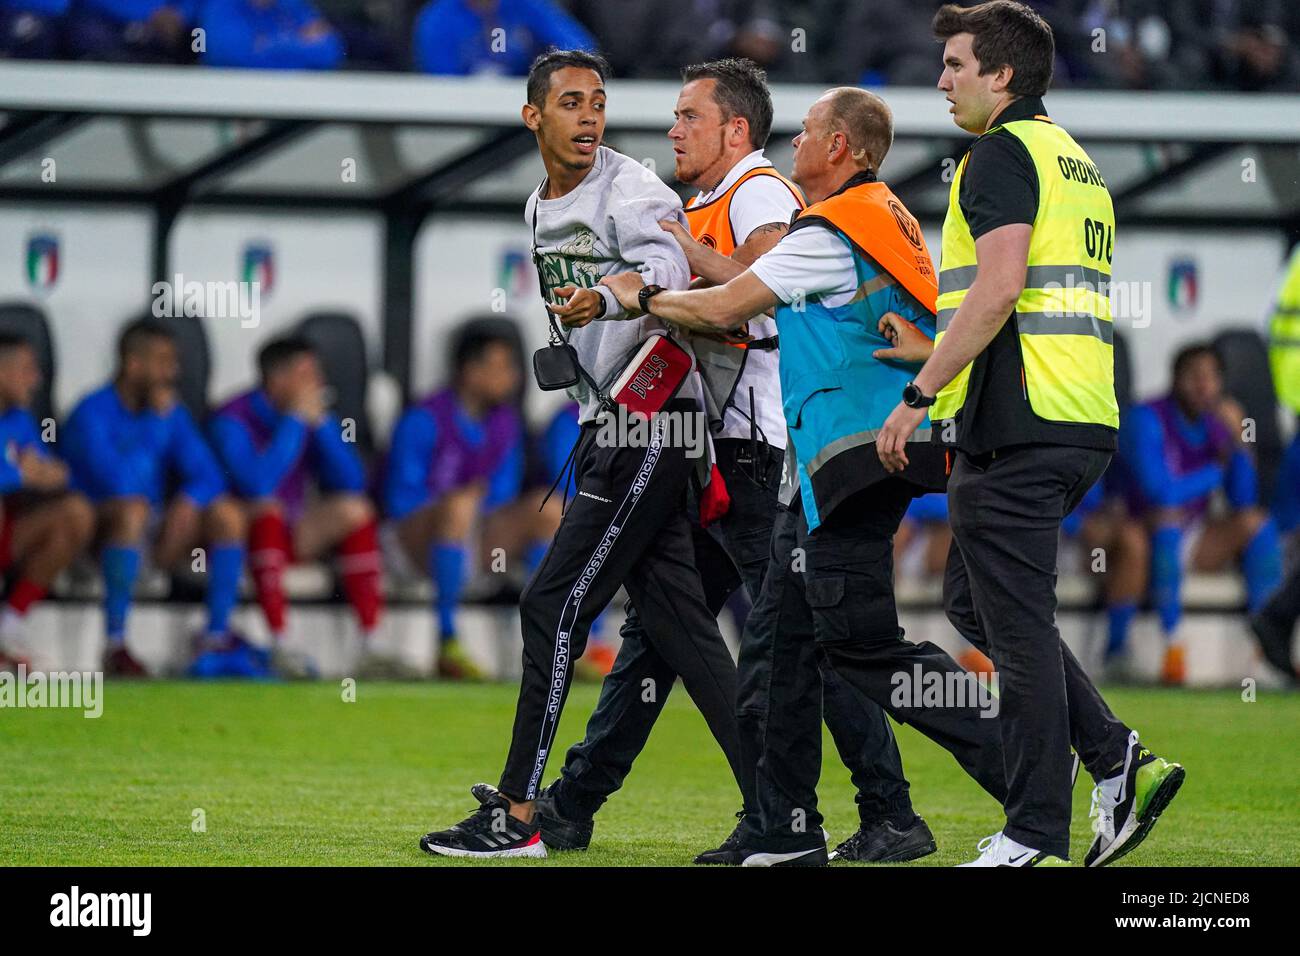 MöNCHENGLADBACH, GERMANY - JUNE 14: pitch invader during the UEFA Nations League match between Germany and Italy at Borussia-Park on June 14, 2022 in Mönchengladbach, Germany (Photo by Joris Verwijst/Orange Pictures) Stock Photo